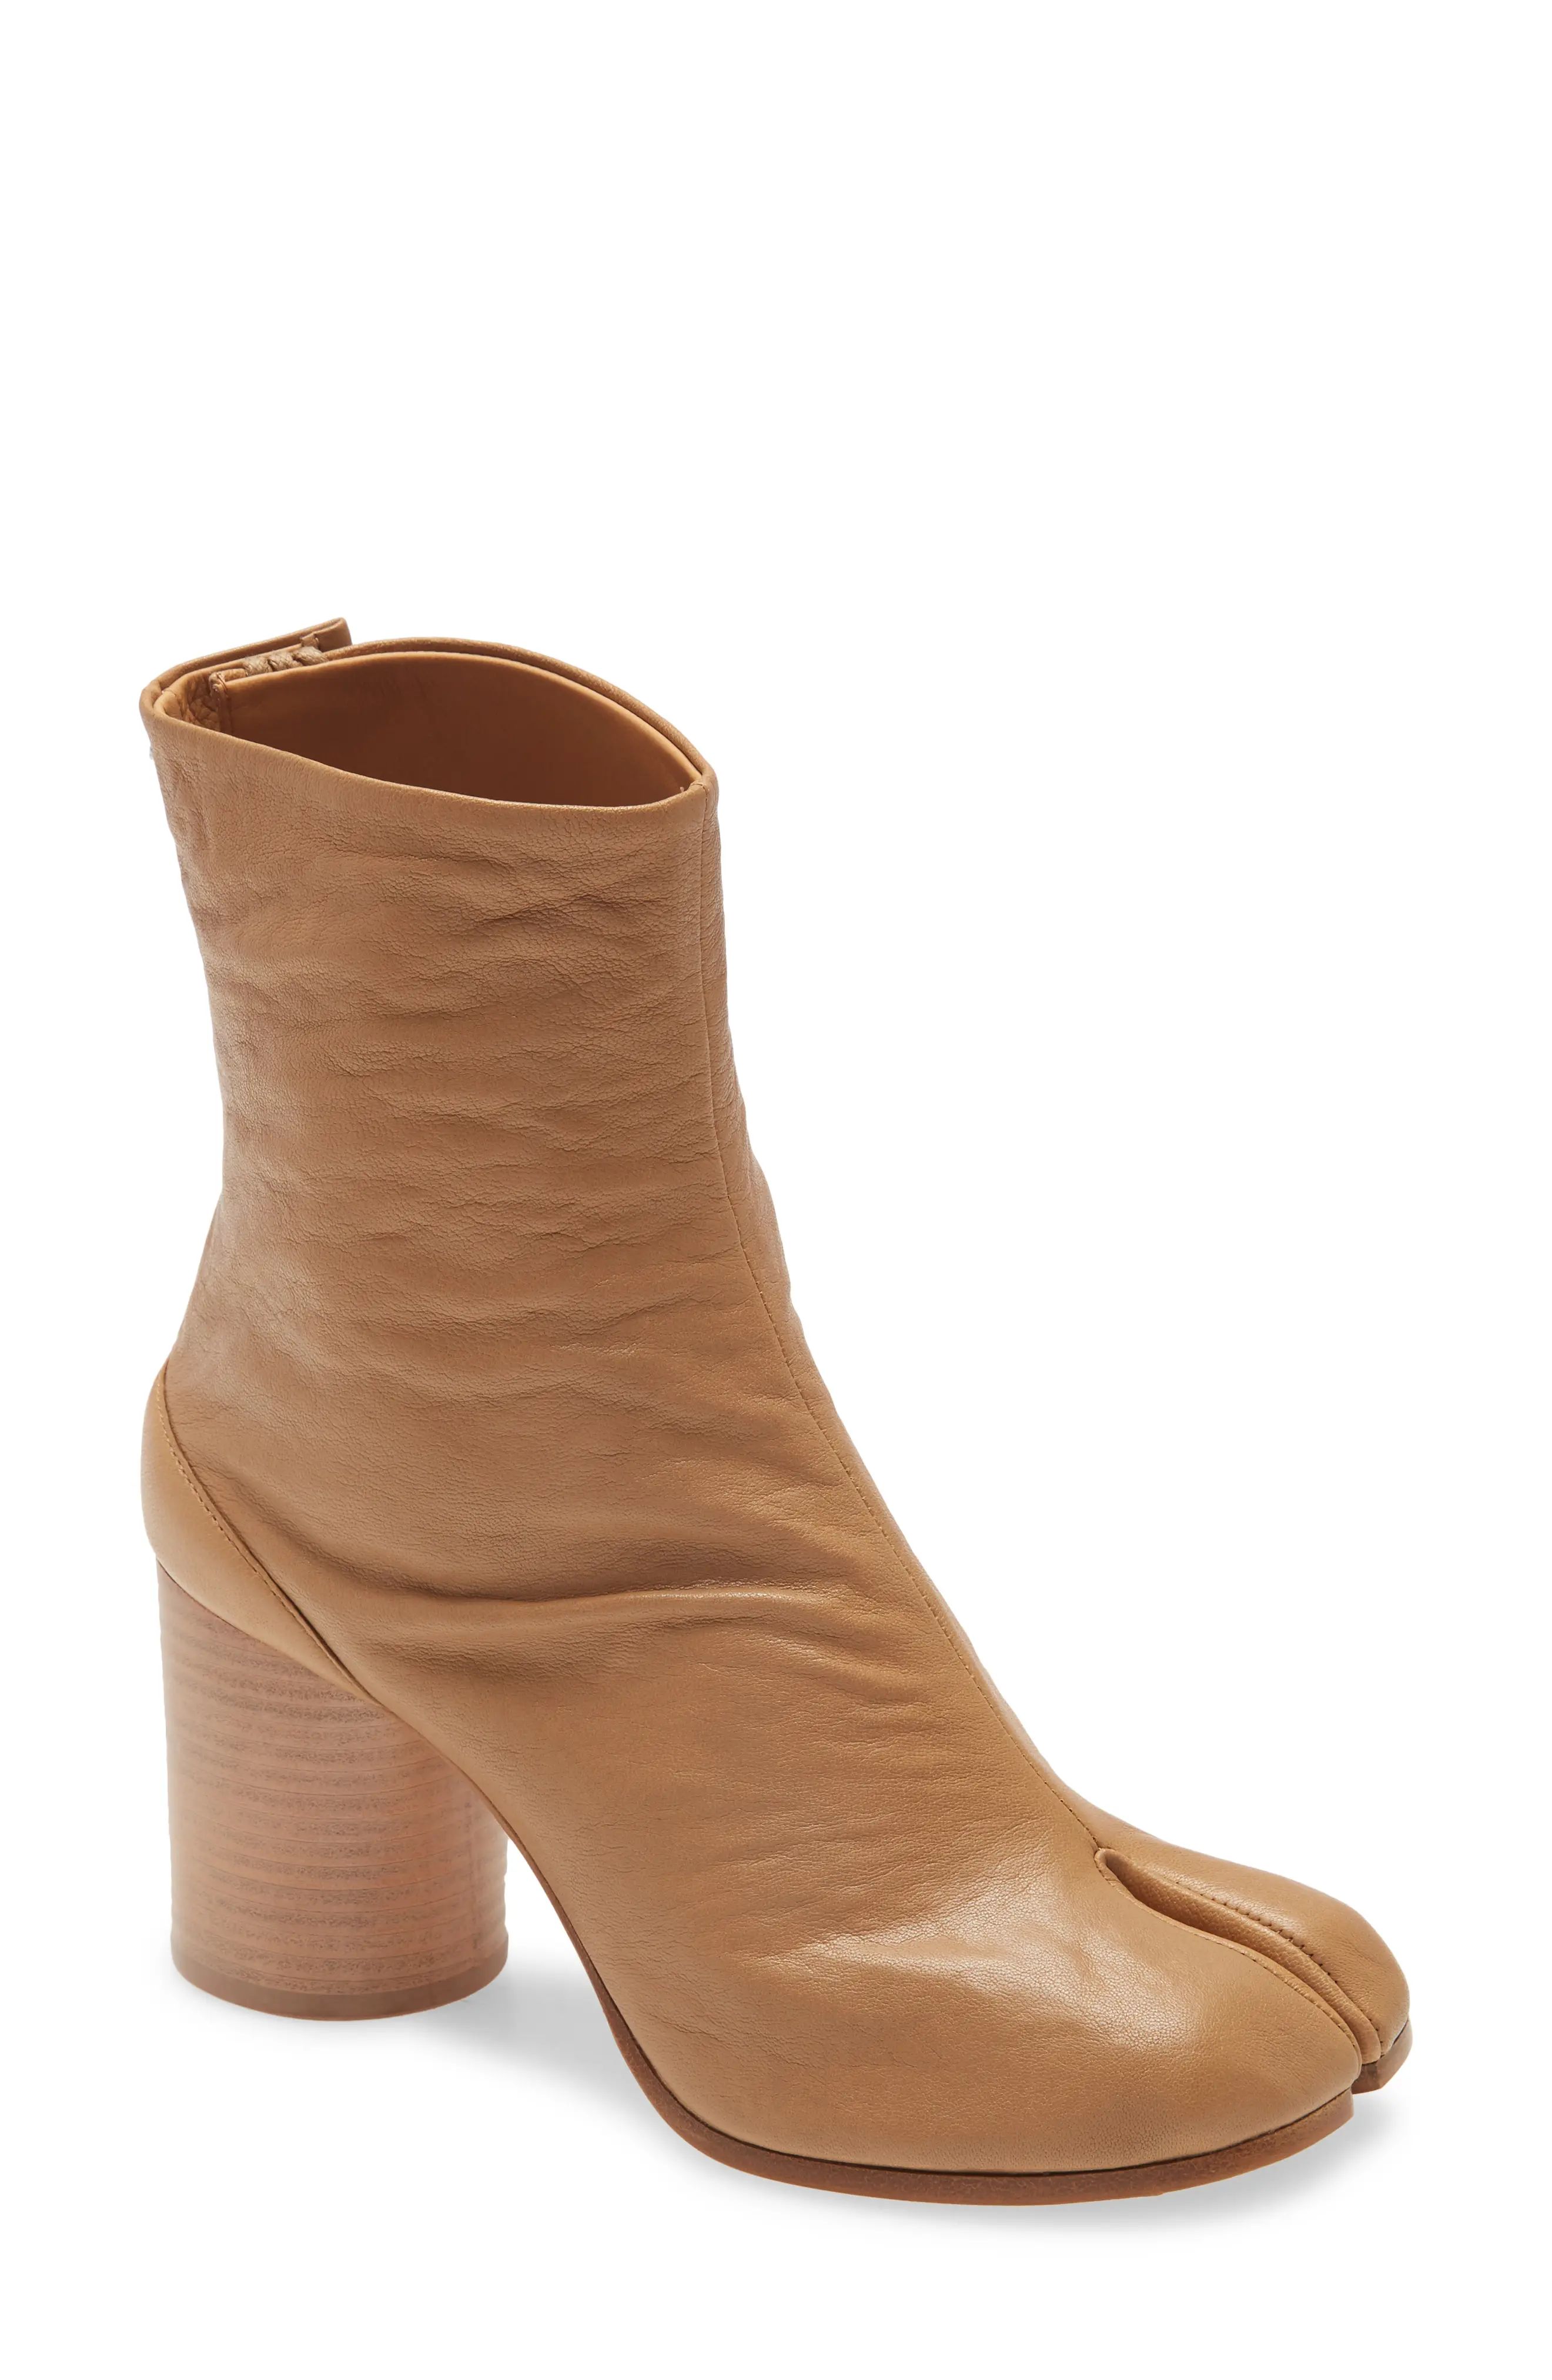 Maison Margiela Tabi Boot in Nude at Nordstrom, Size 8Us | Nordstrom